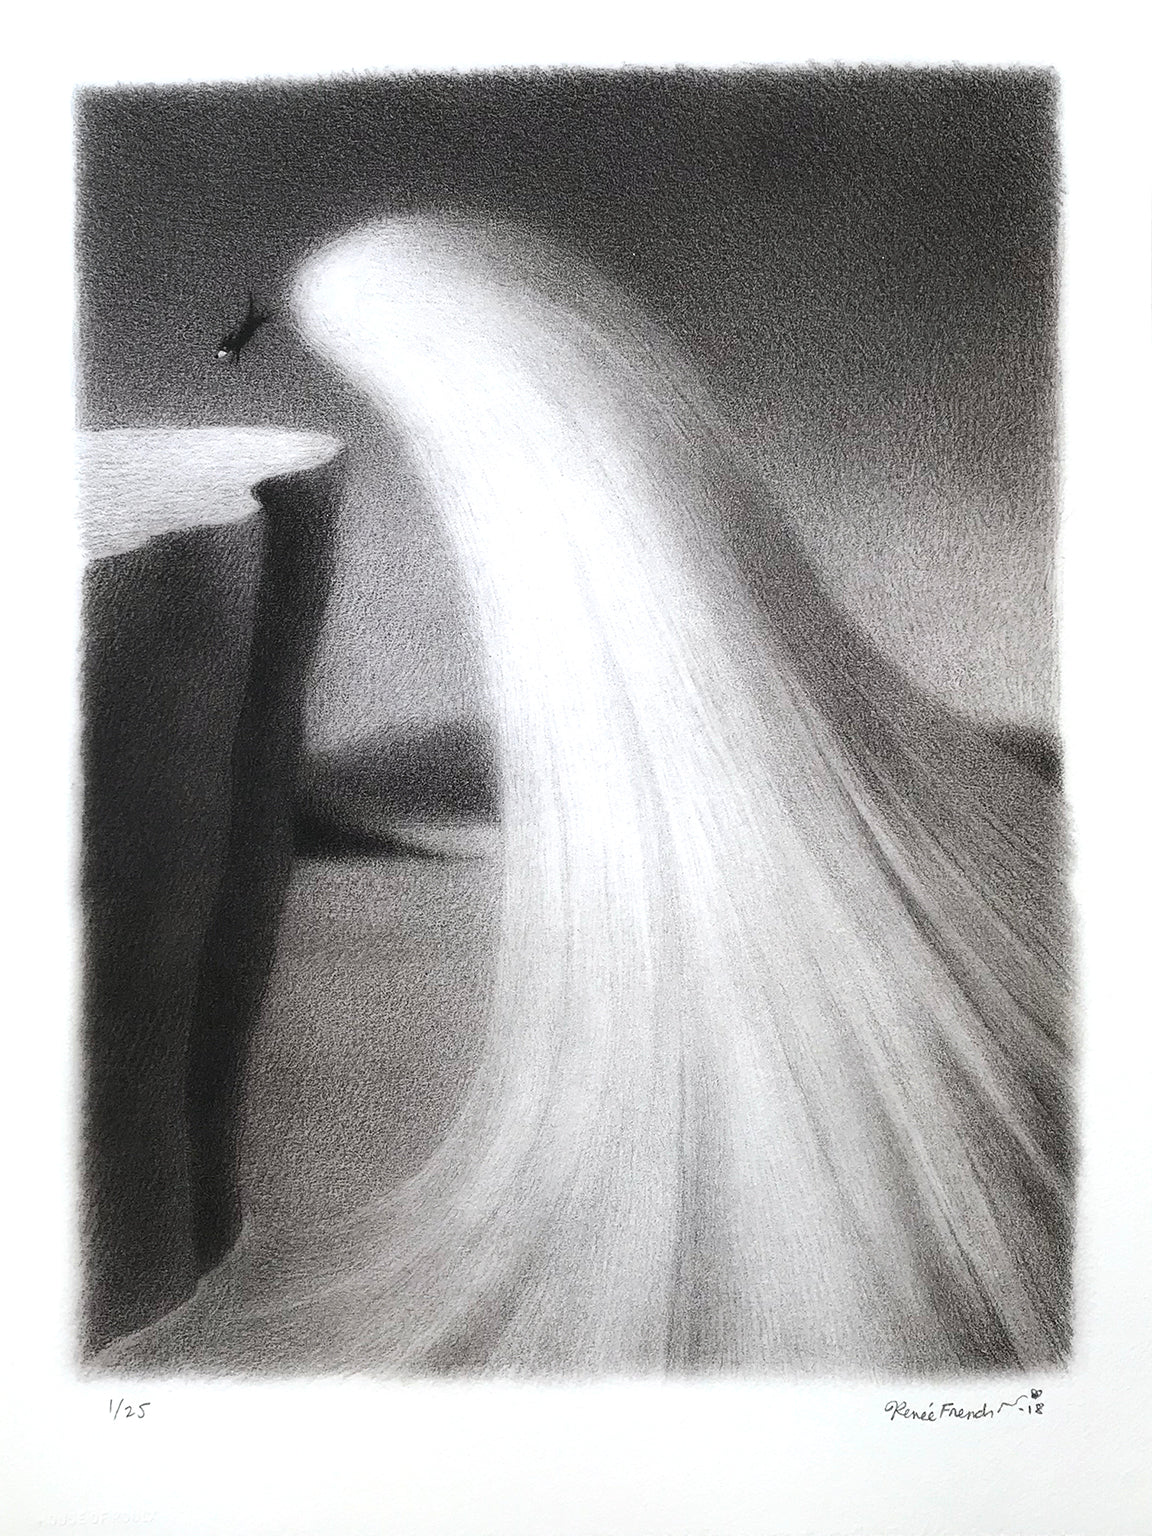 Renee French &quot;Horatio&#39;s Wave&quot; - Archival Print, Edition of 25 - 12 x 16&quot;